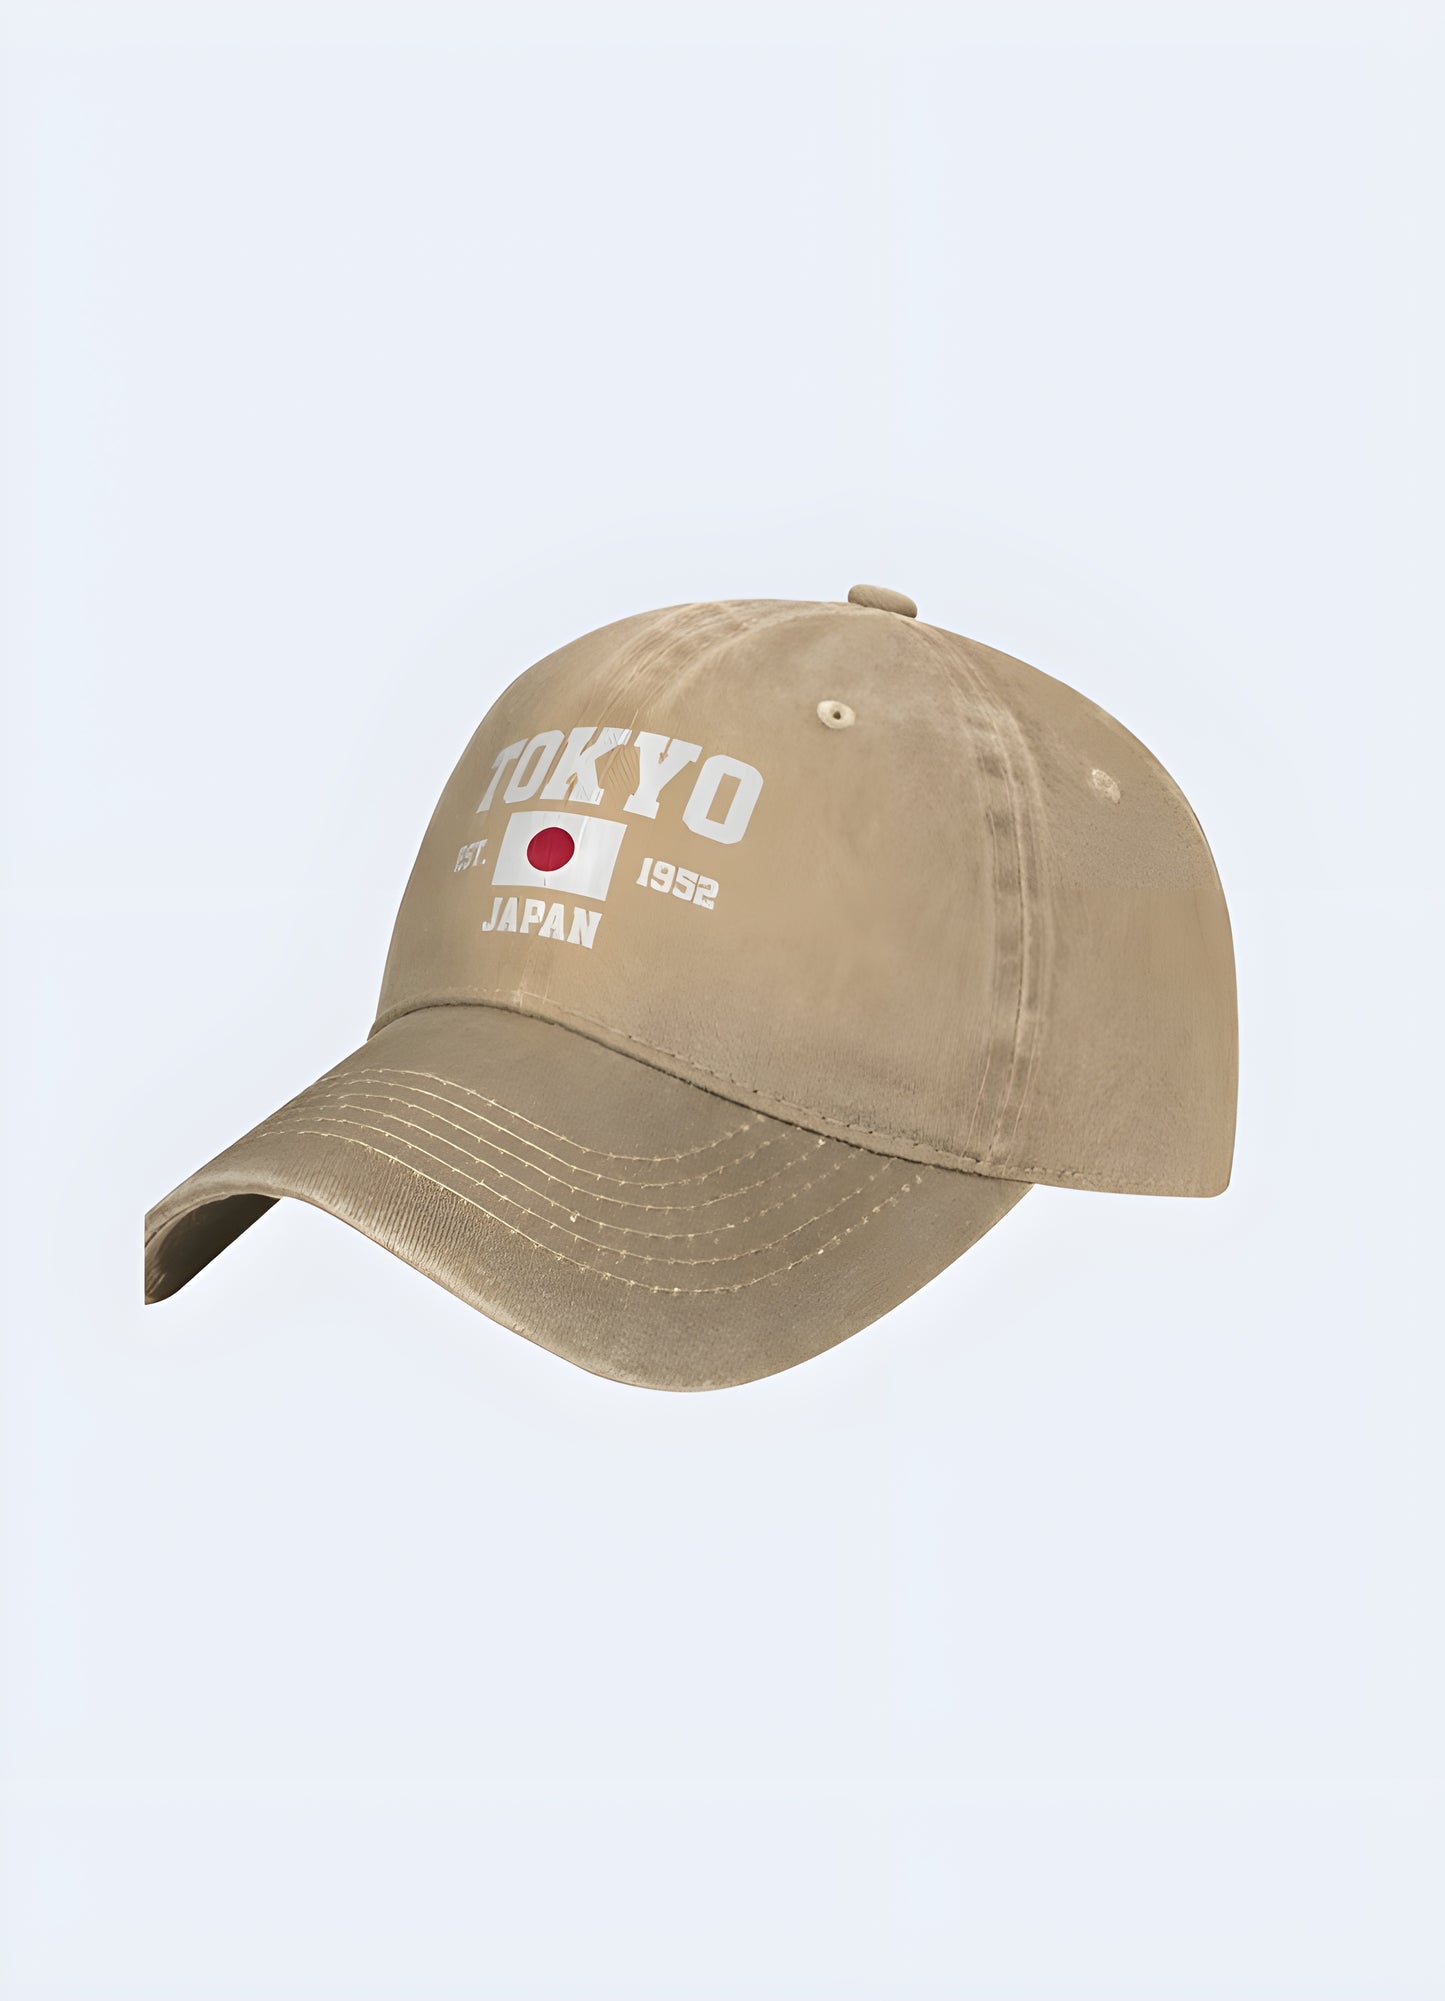 Explore the streets in style with this versatile japanese baseball cap.